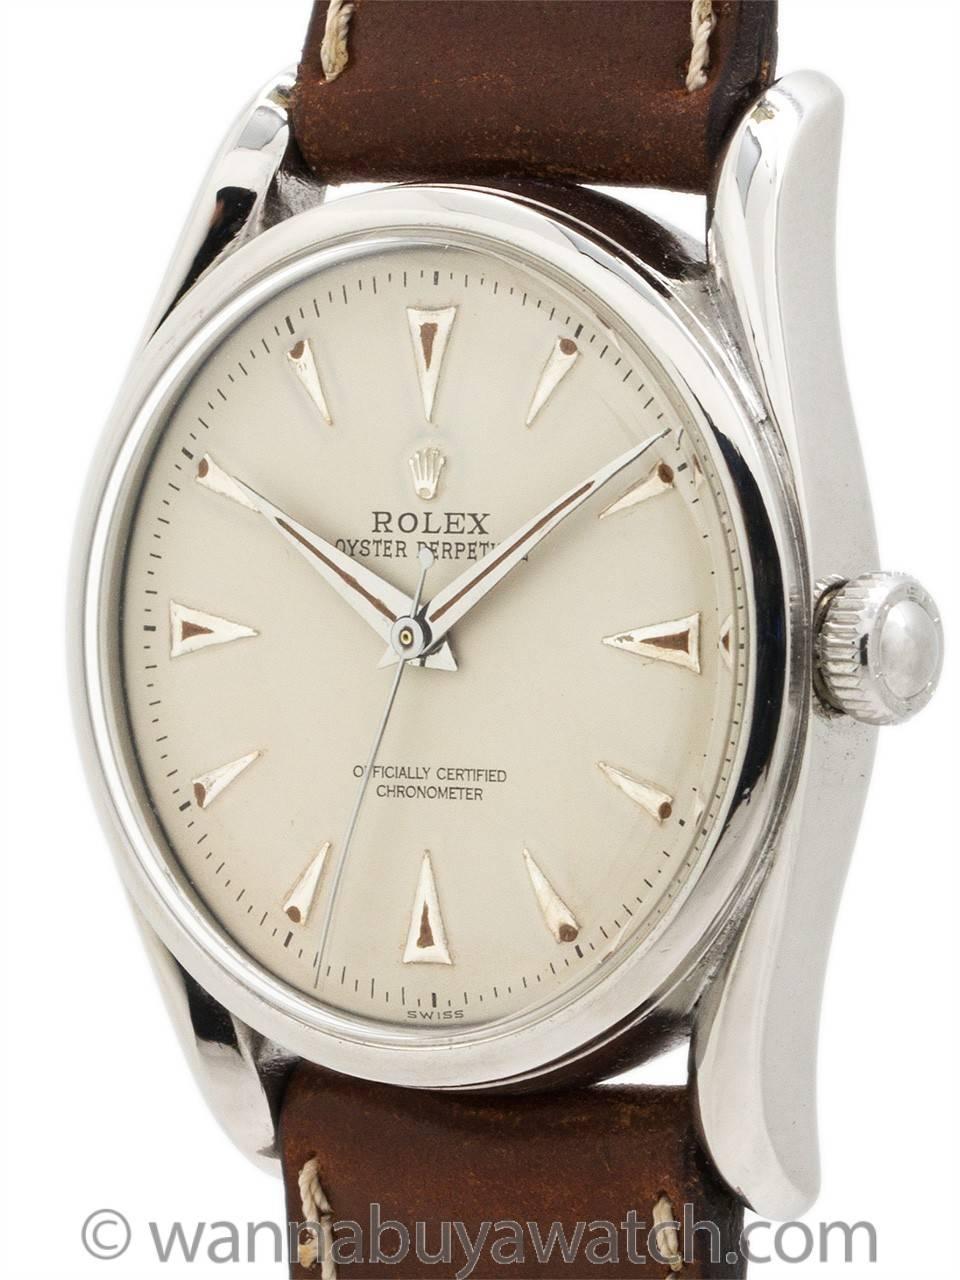 Scarce and desirable model Rolex stainless steel “Bombe ref 5018 serial # 608,xxx circa 1948. Featuring 35mm diameter Oyster case with extended bowed lugs, smooth bezel, acrylic crystal, and very pleasing refinished antique white dial with raised